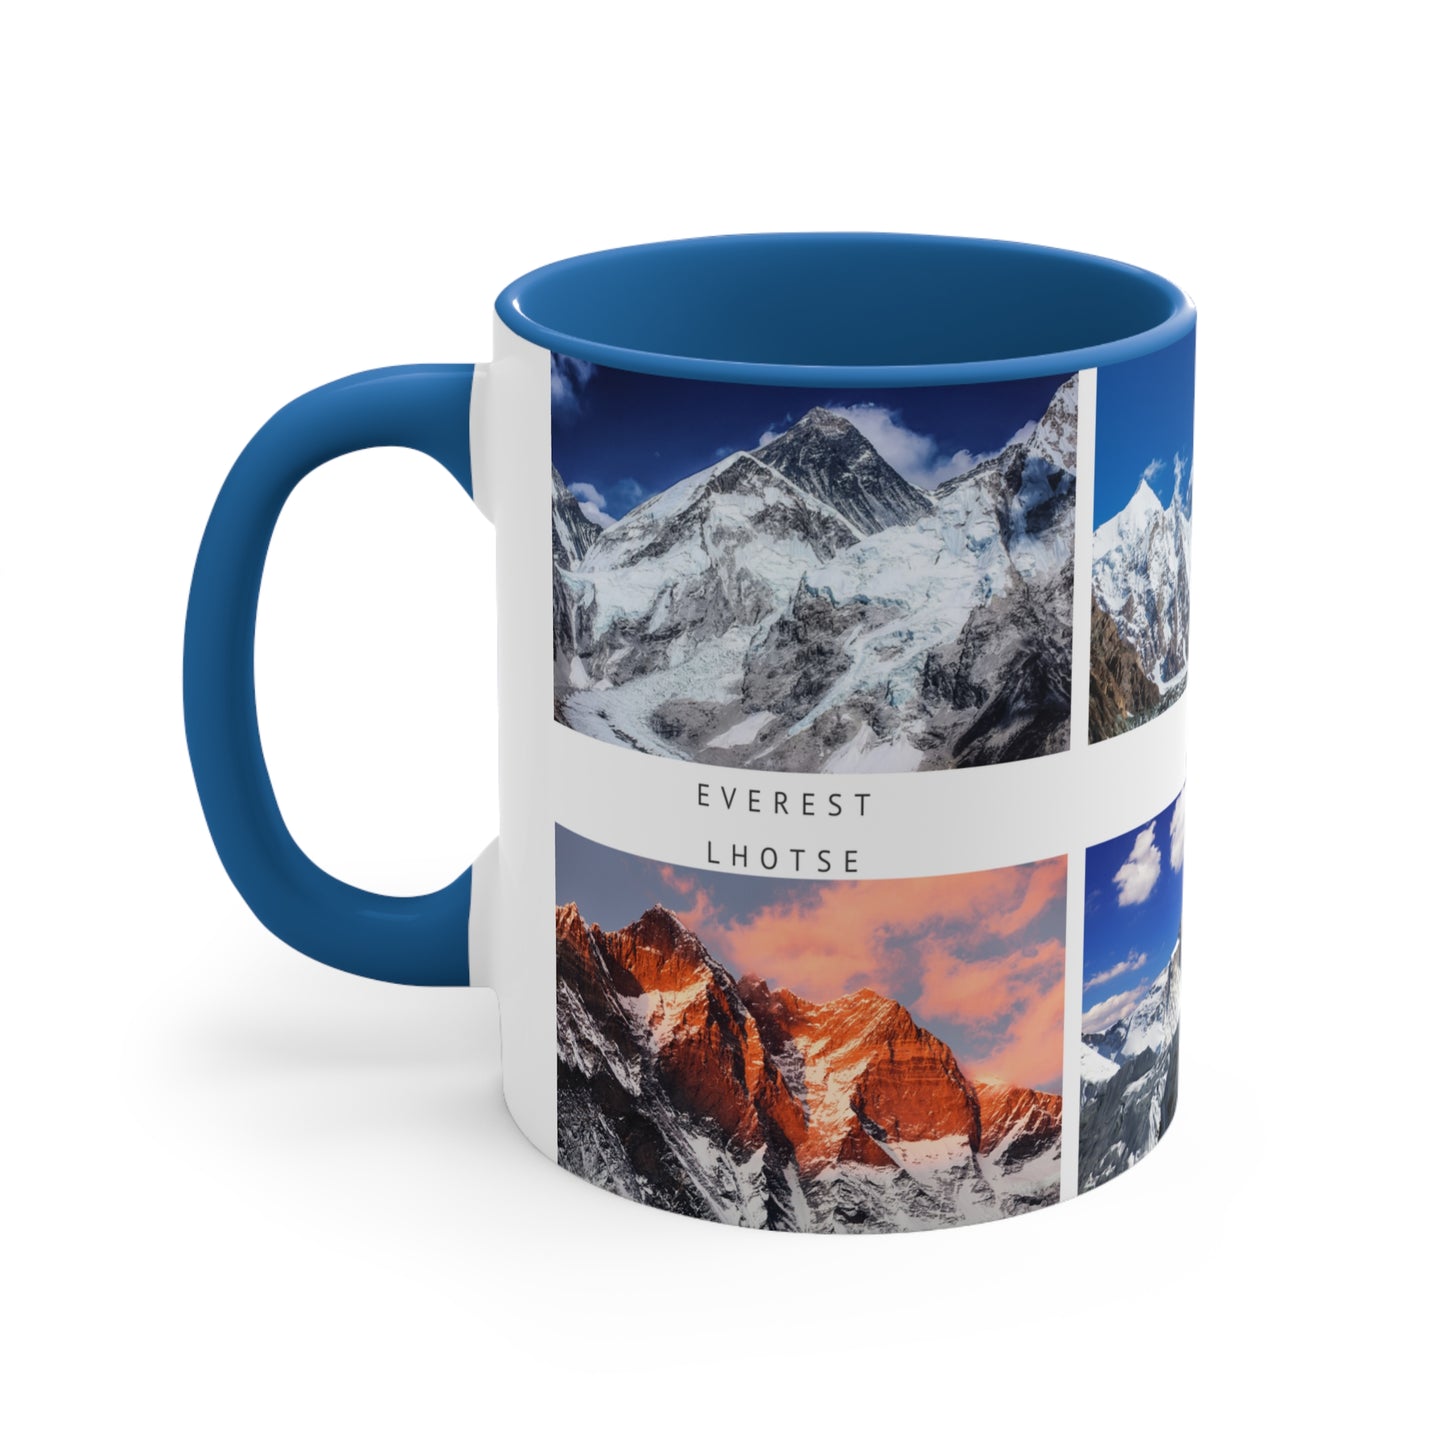 Top 6 tallest peaks in the world for the true Alpinists! This Travel Accent Coffee Mug is a part of a Travel Series for you to choose from. 11oz. Great as a gift or get one to enjoy yourself.